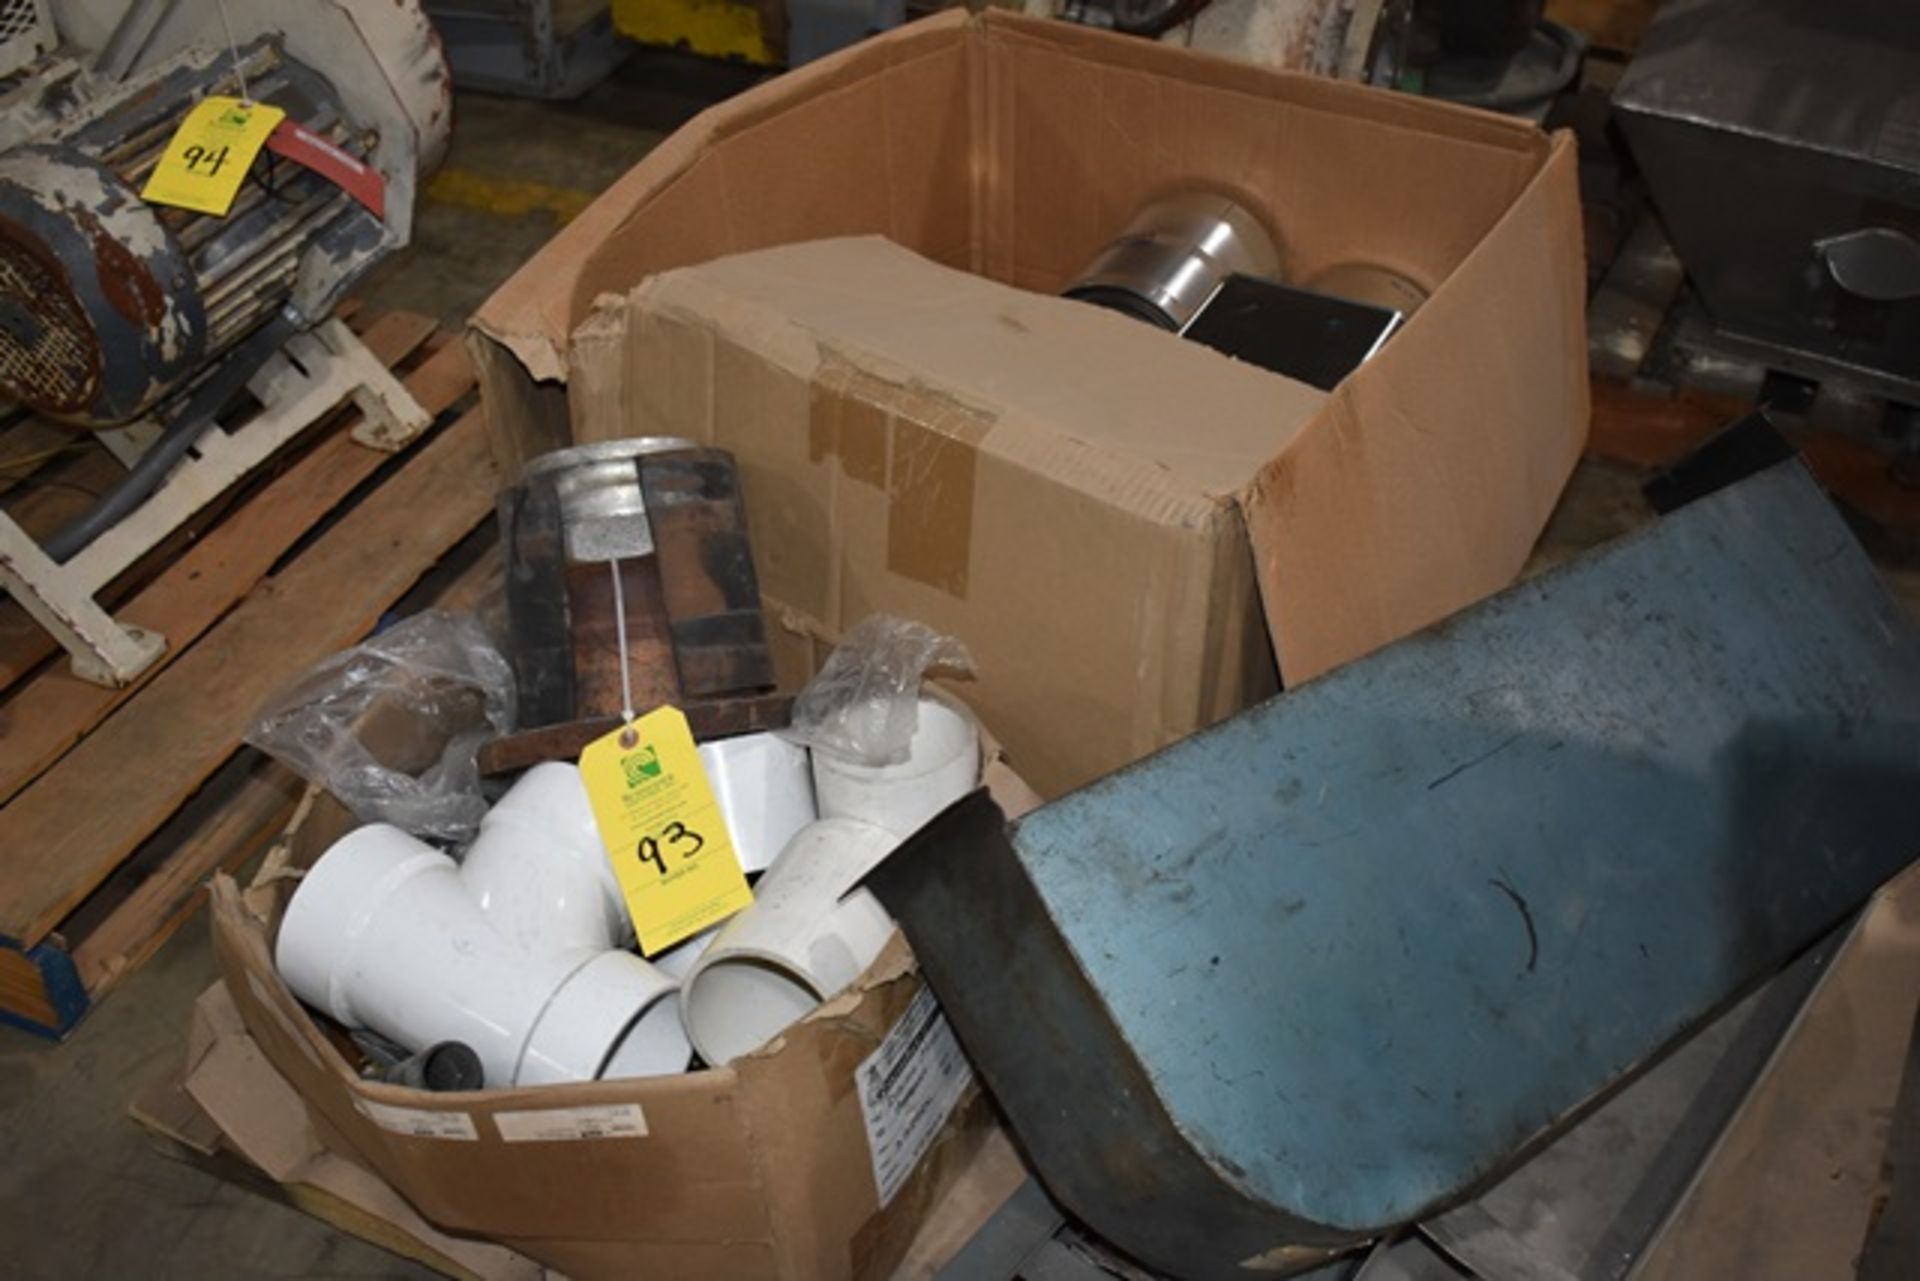 Plant Support - PVC Pipe Components, Assorted Cans. Rigging/Loading Fee: $25